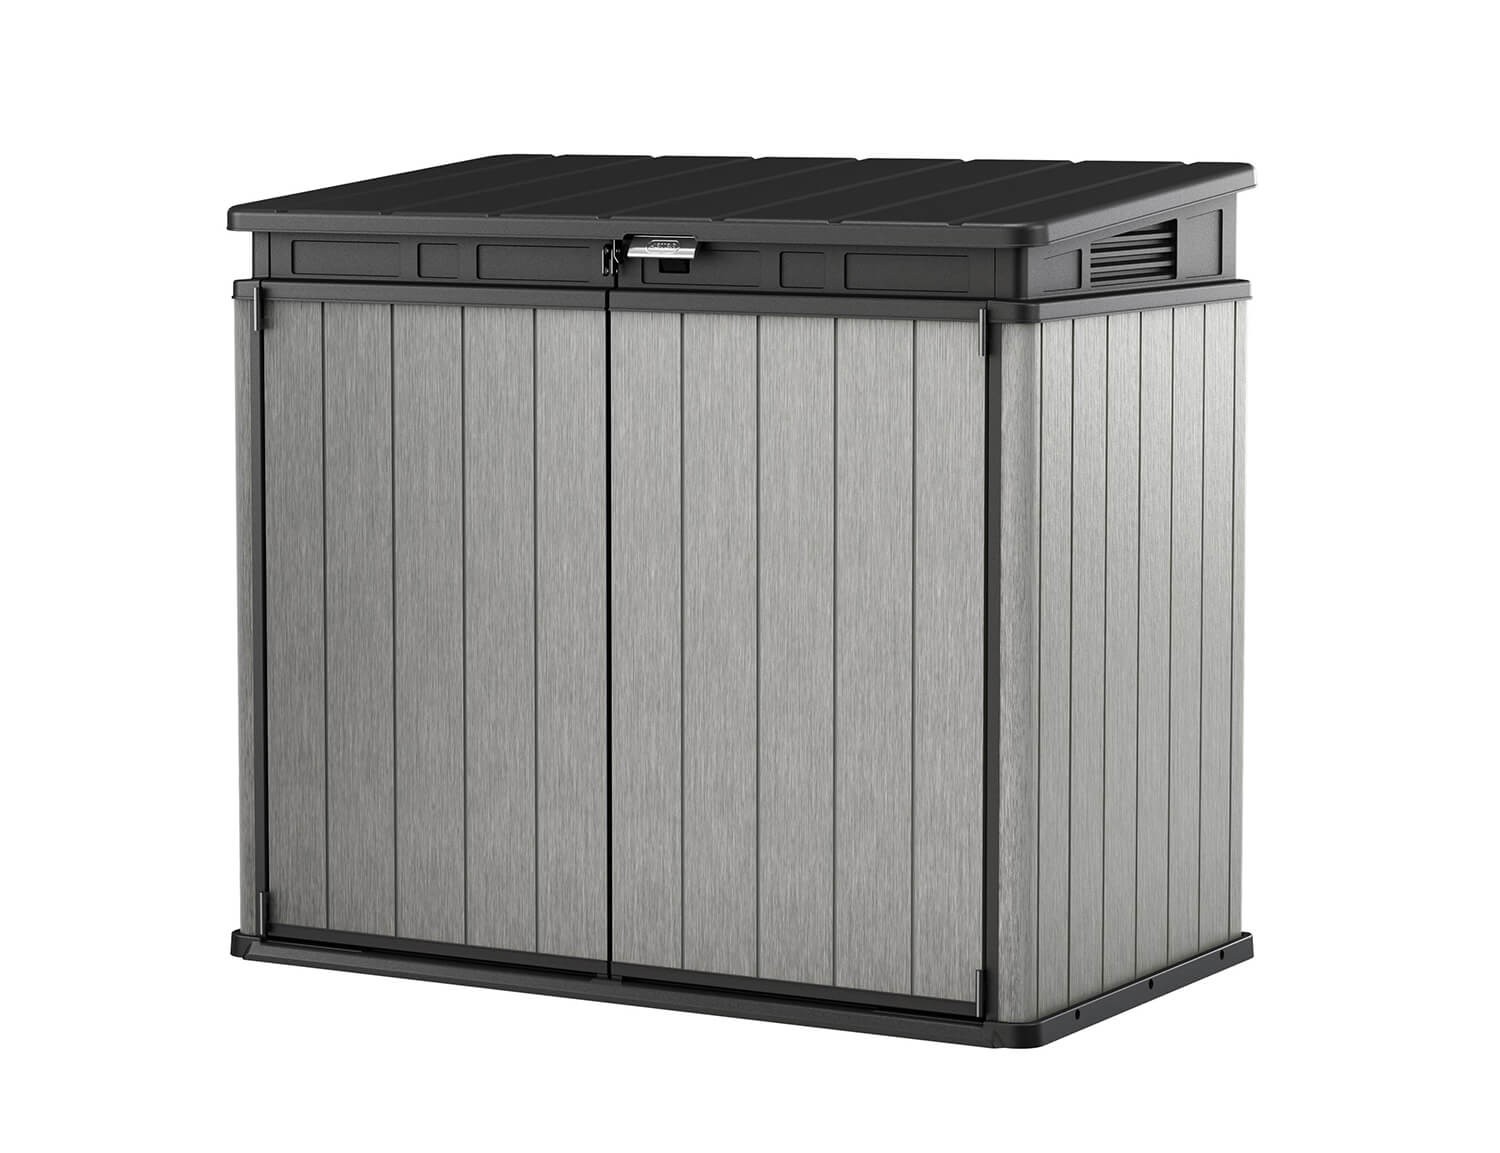 keter elite store duotech outdoor storage shed - £209